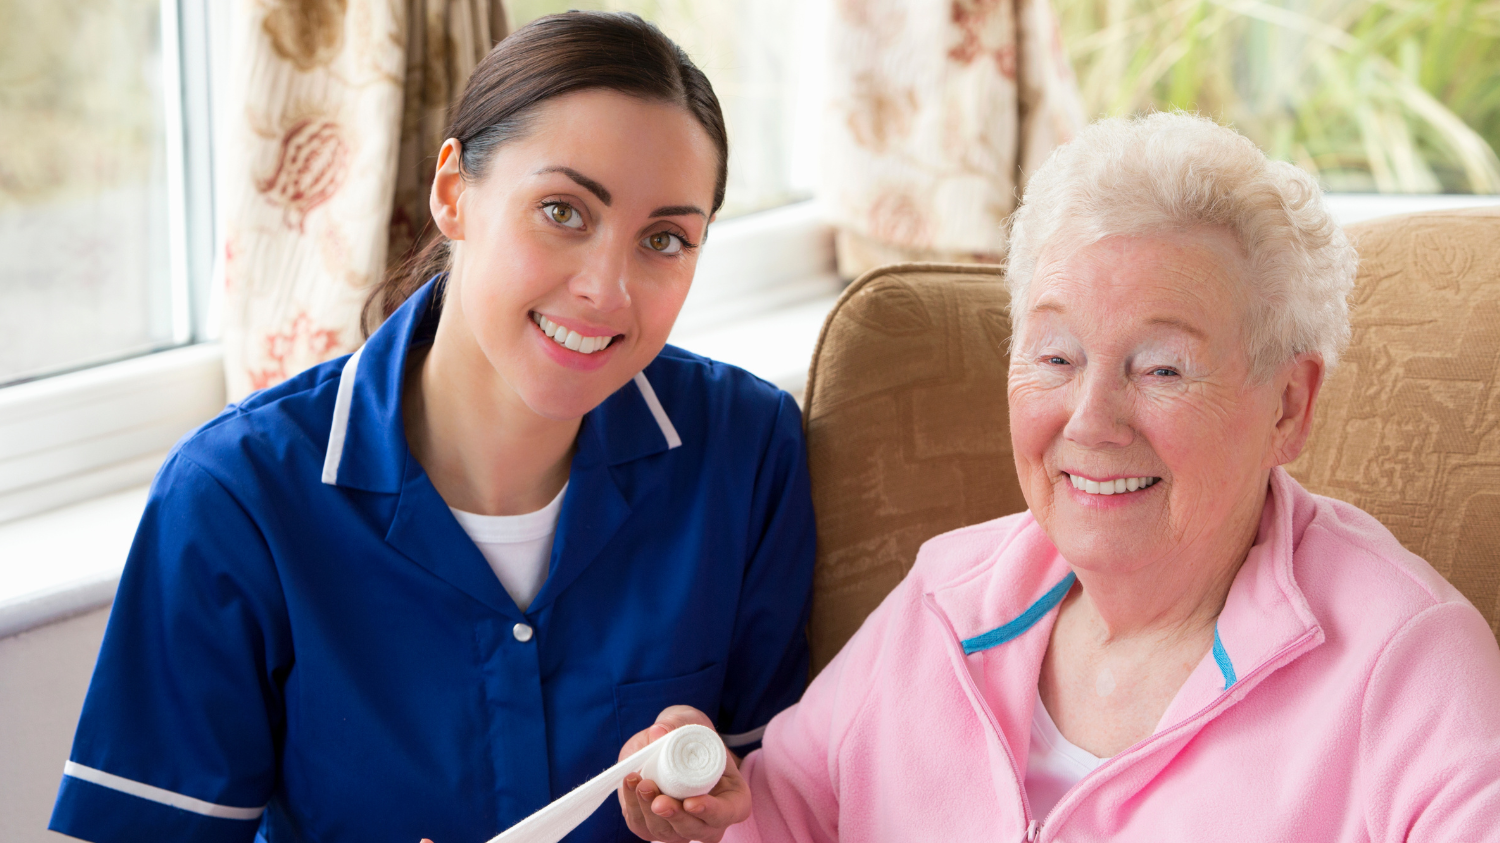 A nurse and a care home guest smile together